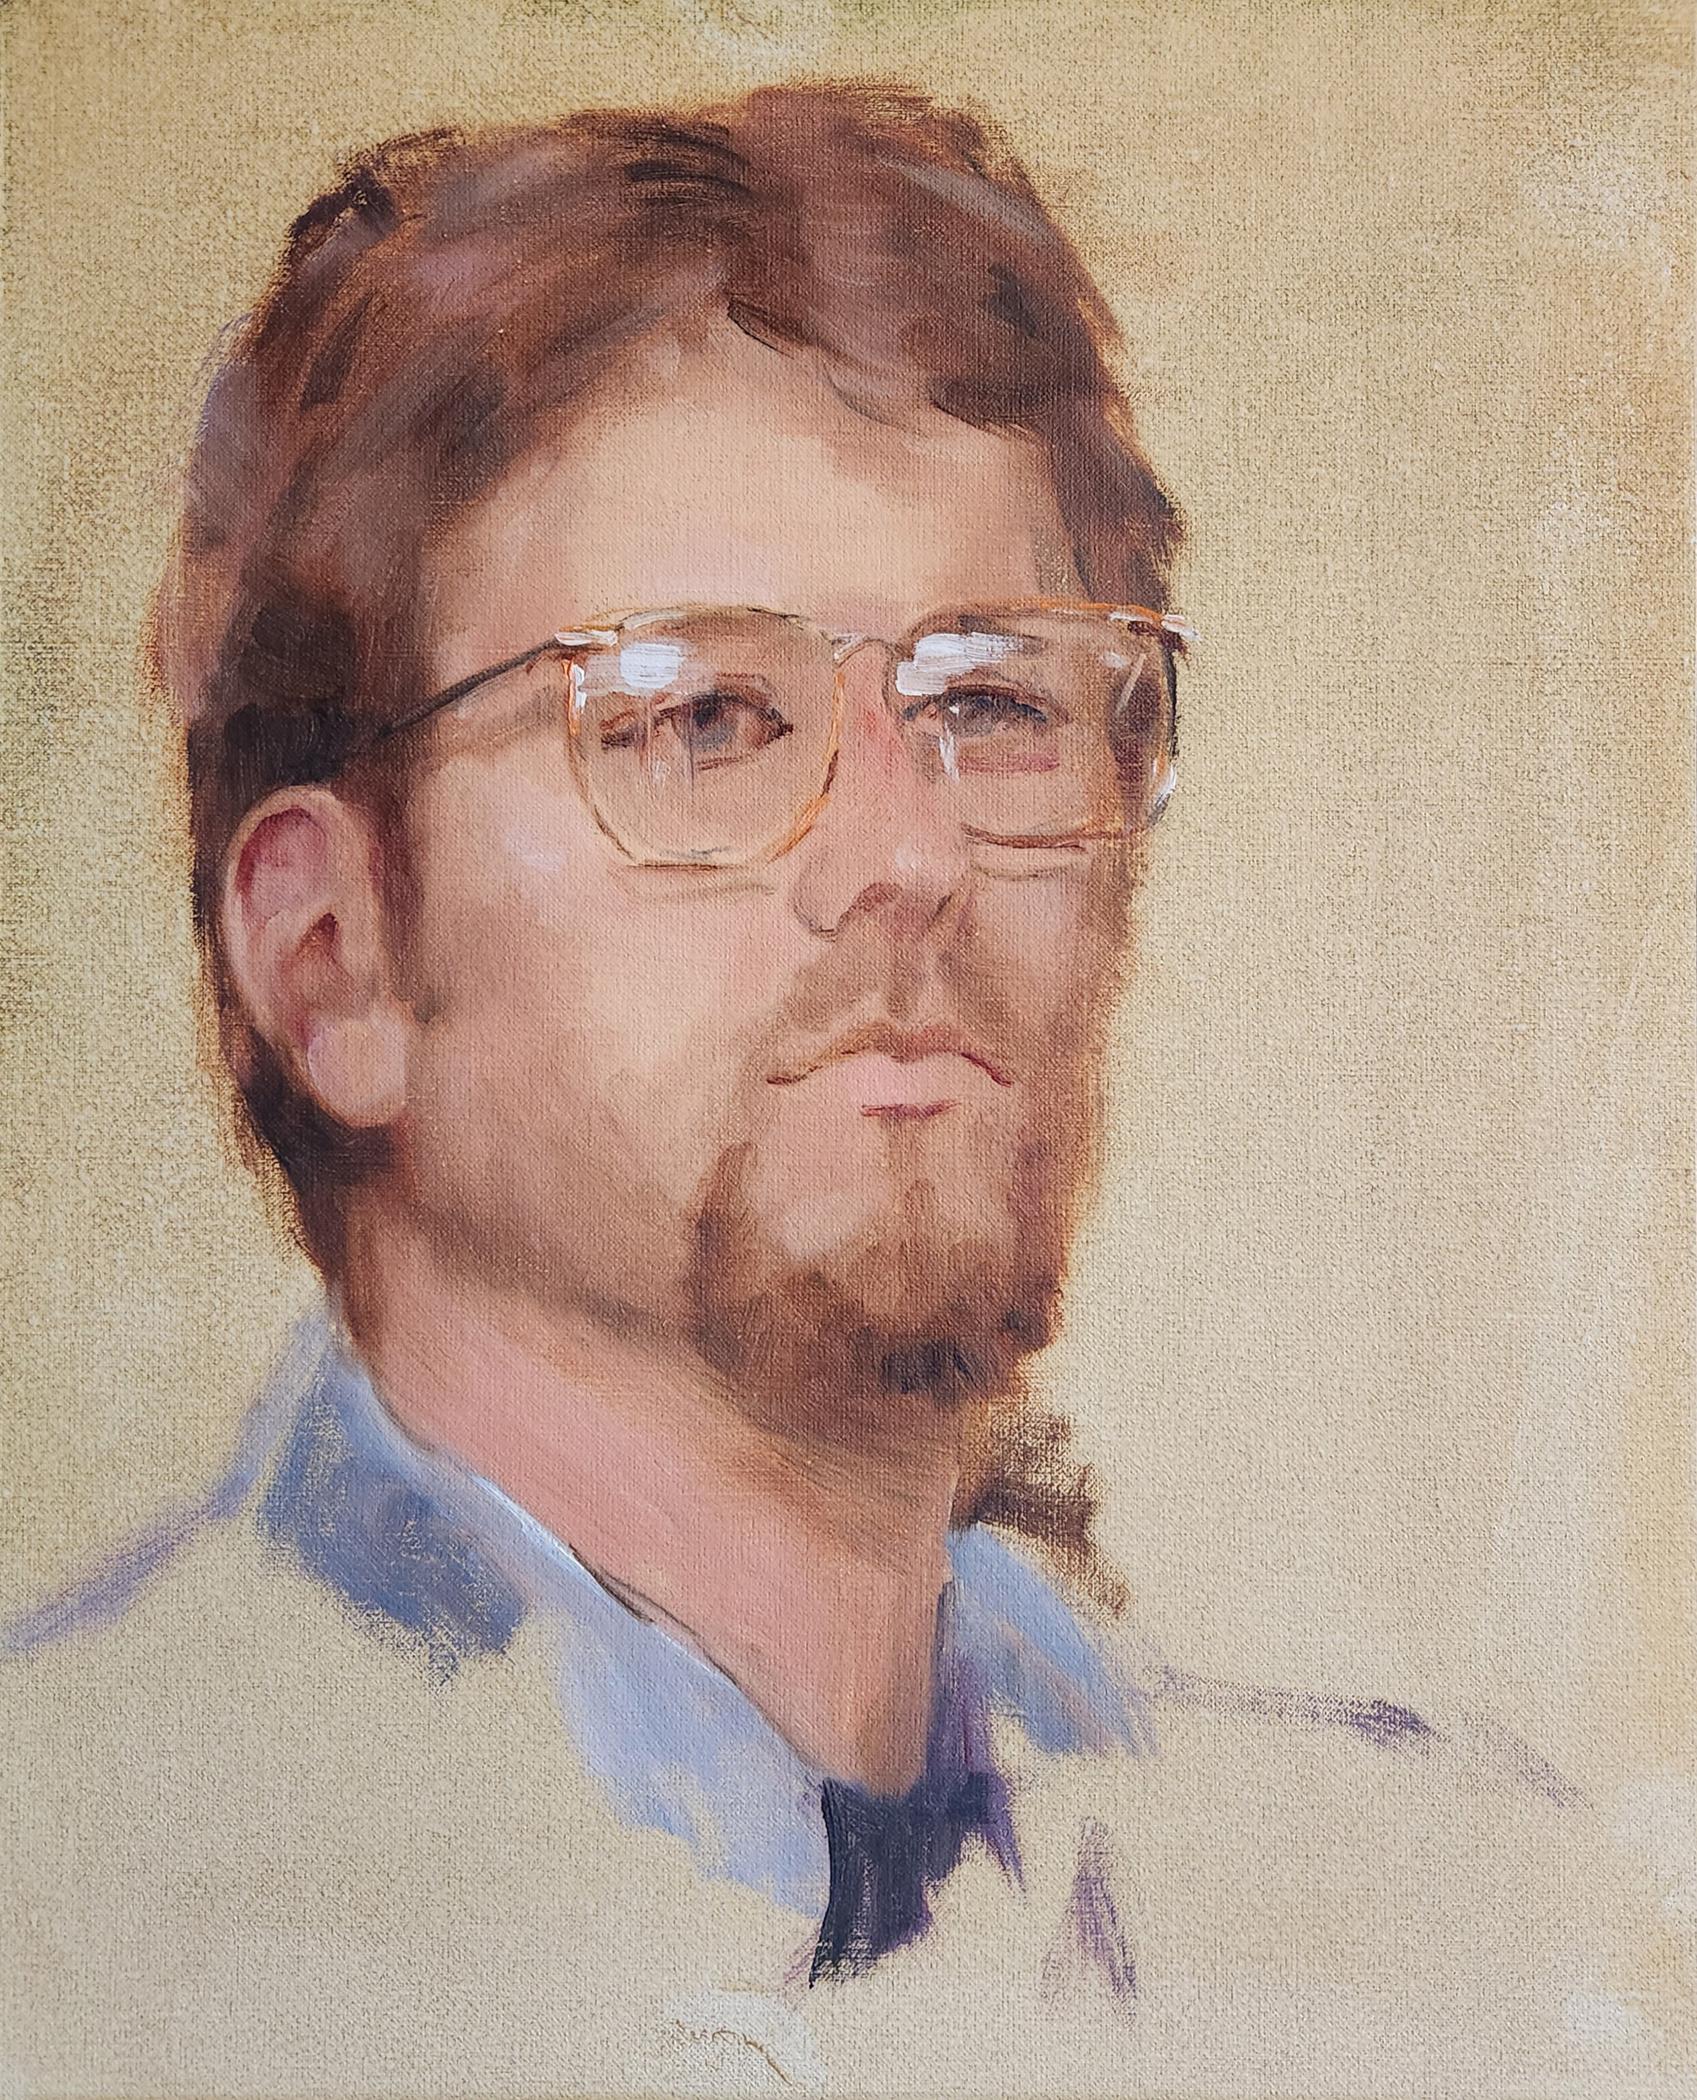 Lu Haskew Portrait Painting - Glasses and Goatee, 14x11" oil on board